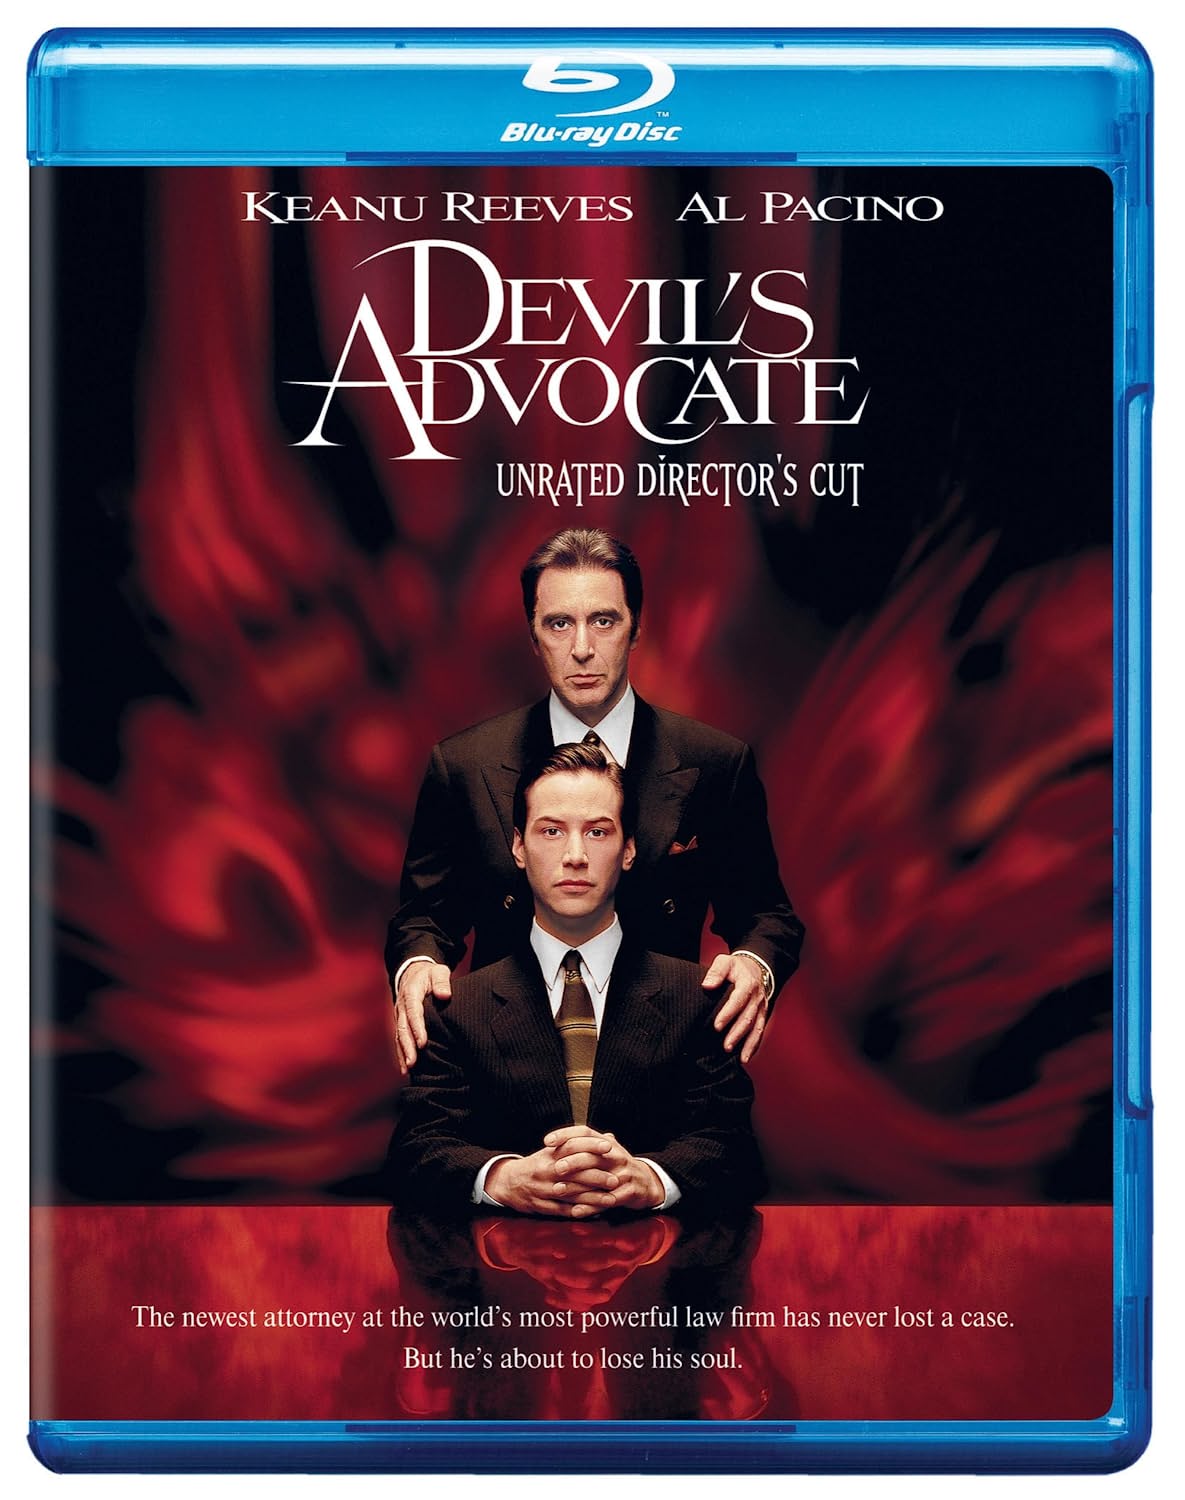 Devil's Advocate (Blu-ray Unrated Director's Cut) - Blu-ray [ 1997 ]  - Thriller Movies On Blu-ray - Movies On GRUV